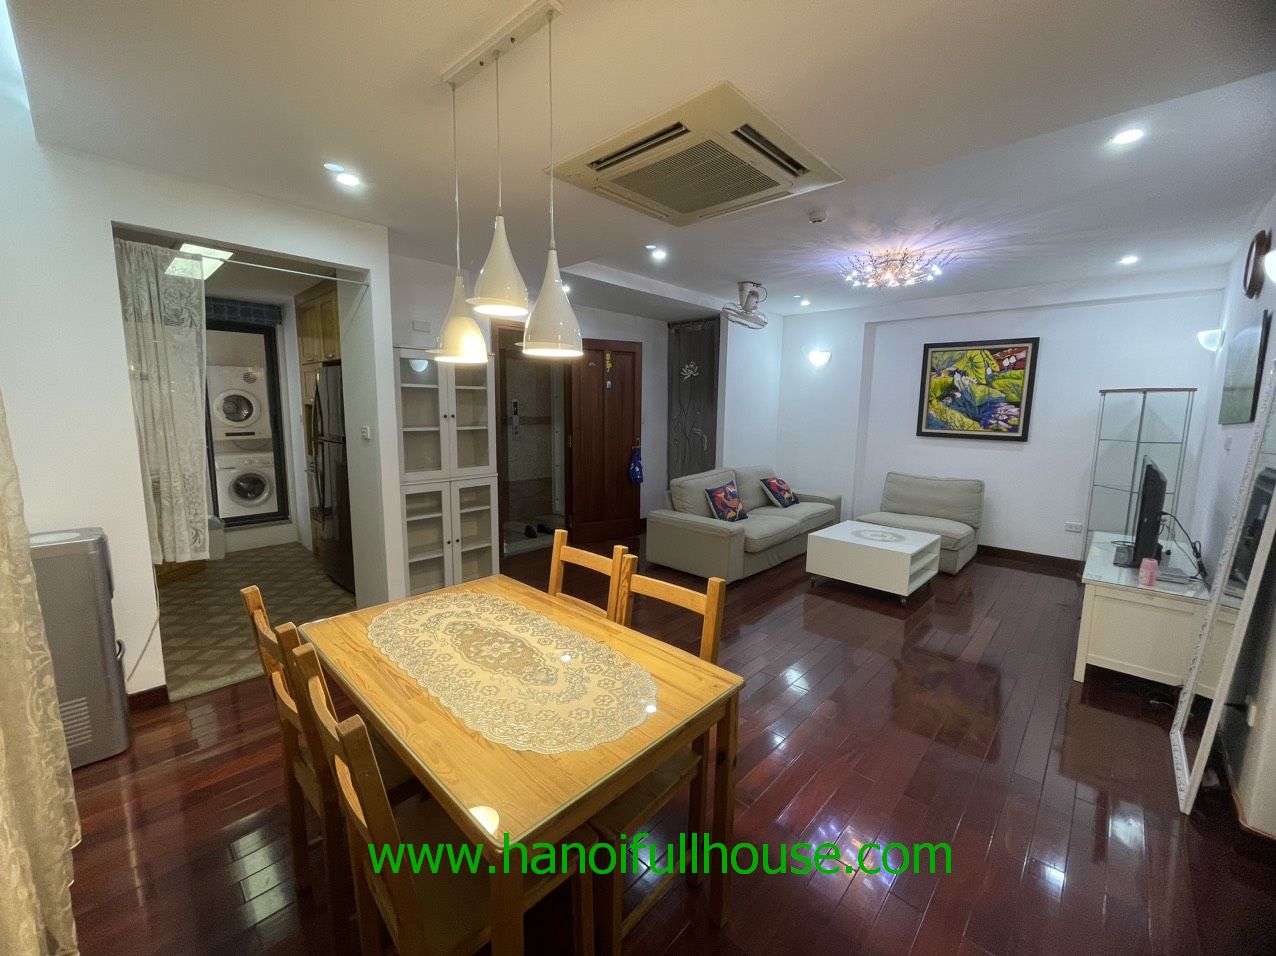 Luxurious serviced apartment with 2 beds for rent in Hoan Kiem district, Ha Noi